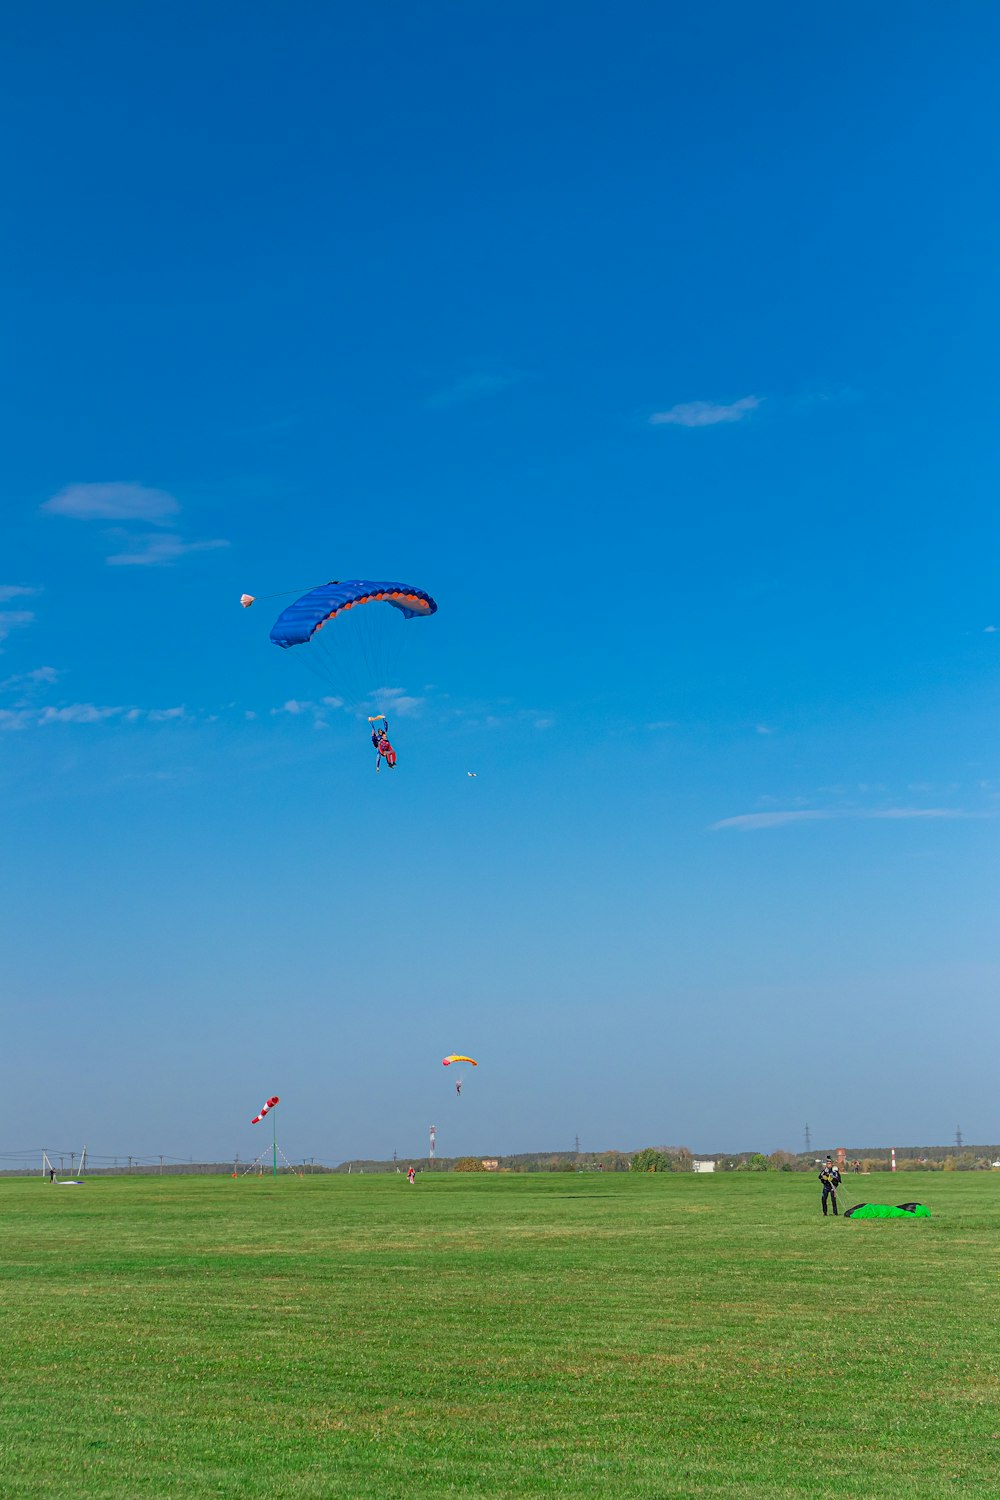 people riding parachute under blue sky during daytime